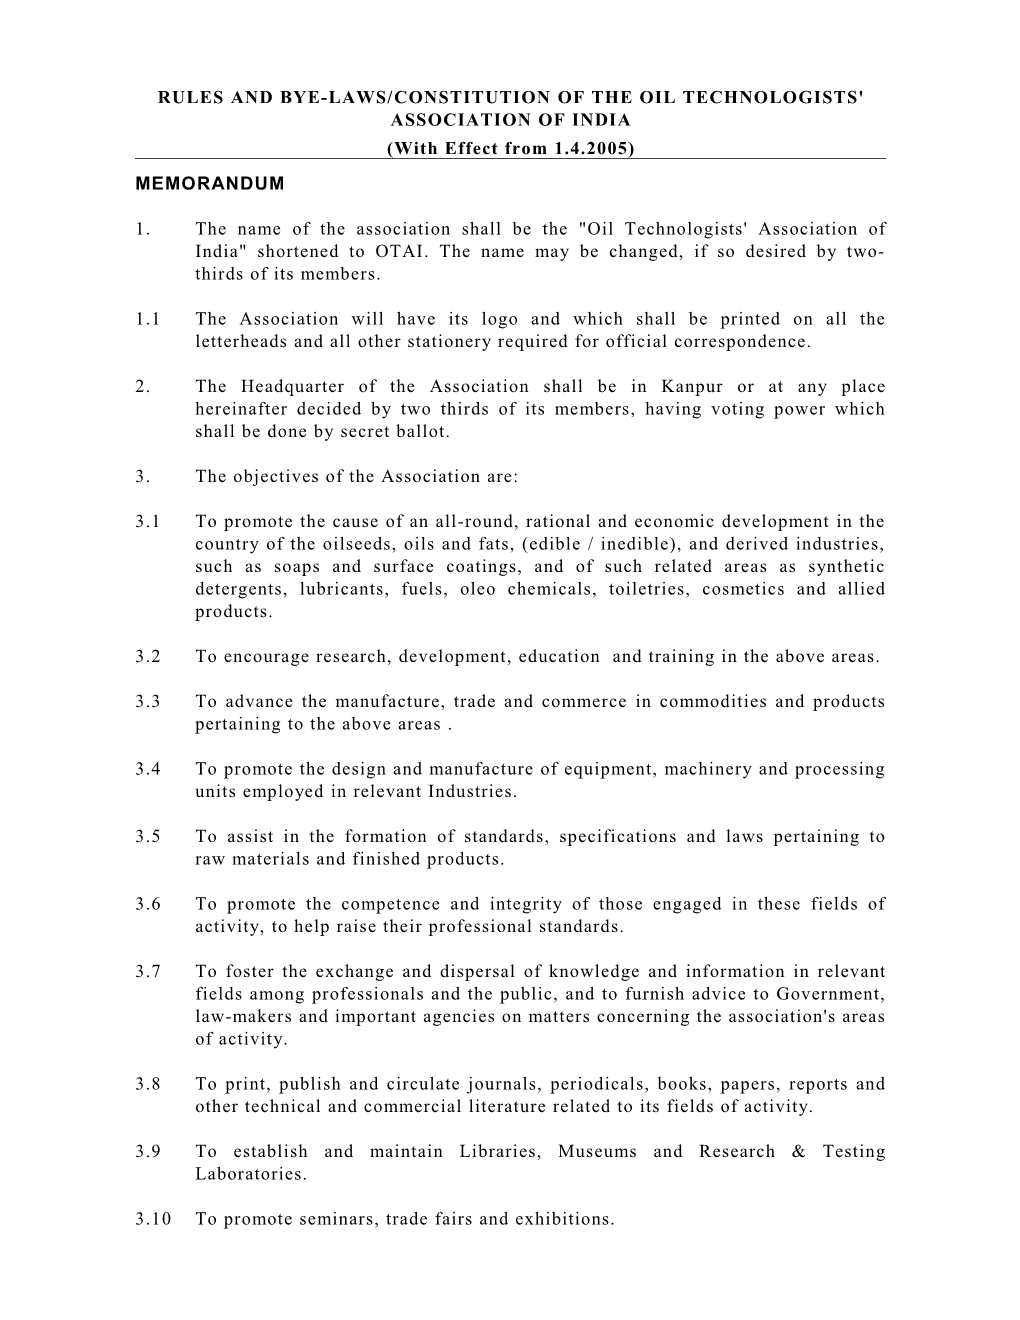 Rules and Bye-Laws/Constitution of the Oil Technologists' Association of India